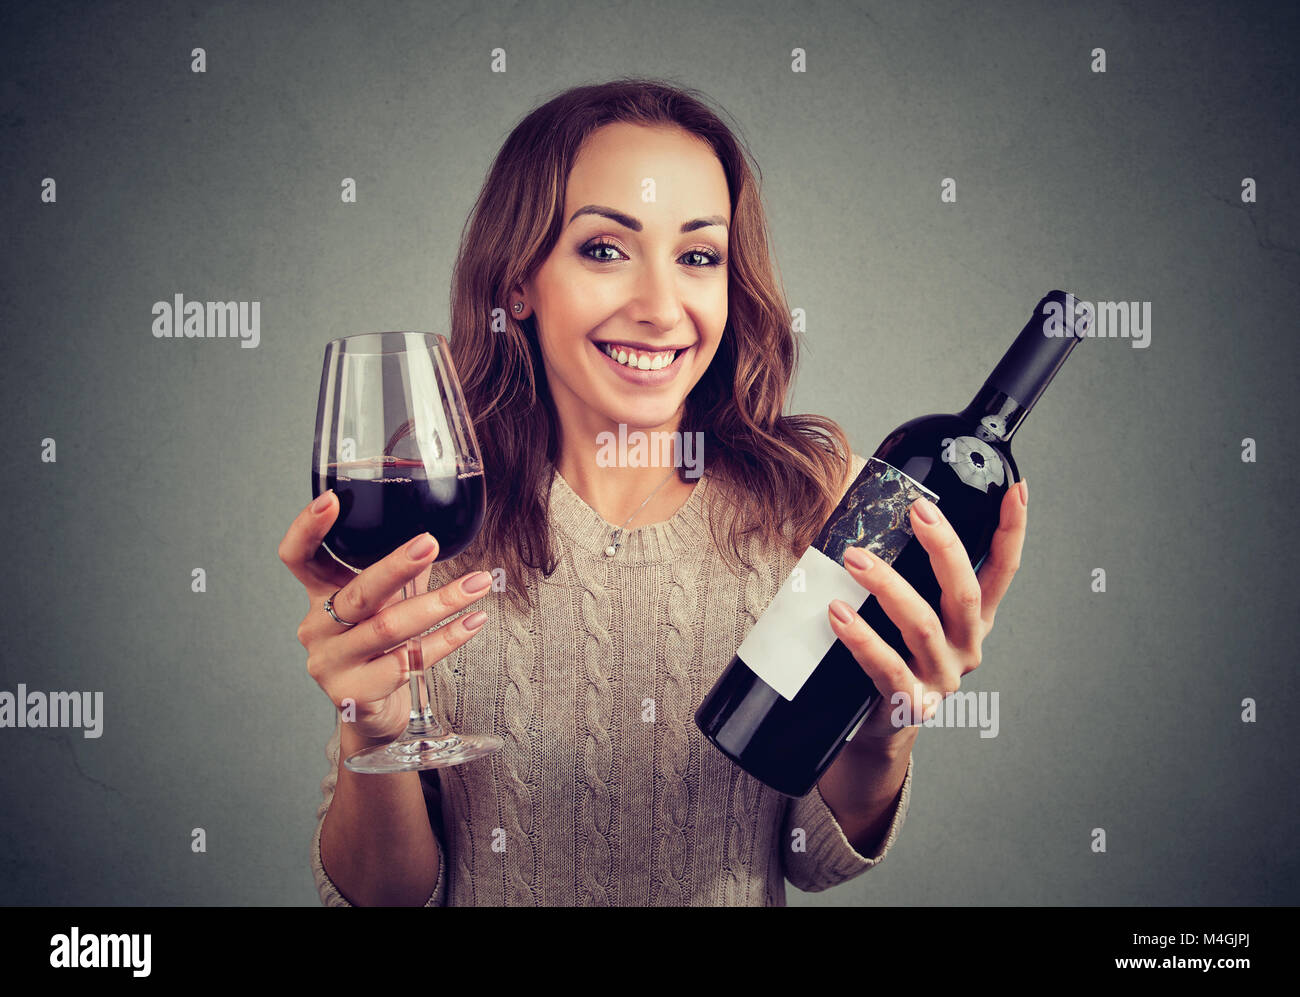 Young woman holding glass of wine and bottle looking happily at camera enjoying taste. Stock Photo